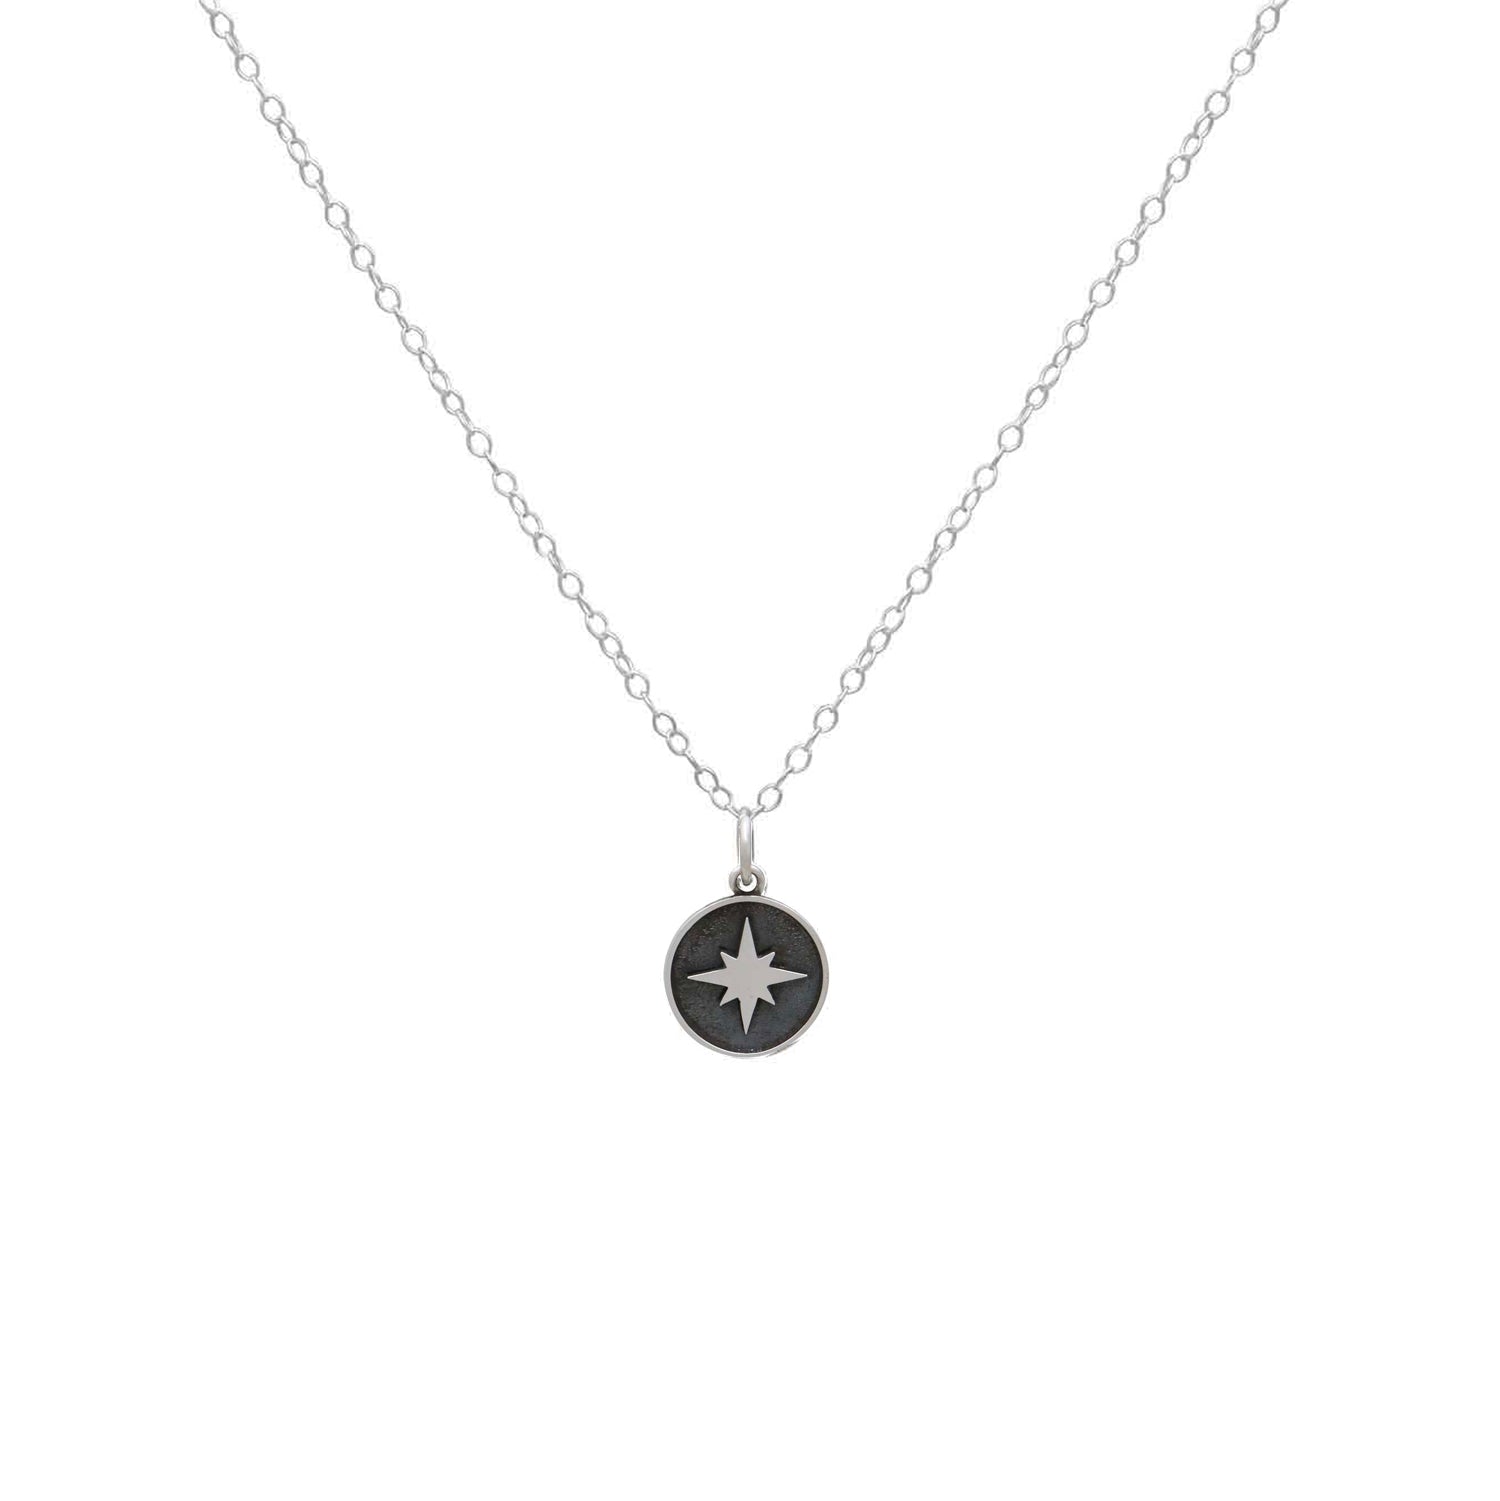 North Star Charm Necklace - Love It Personalized